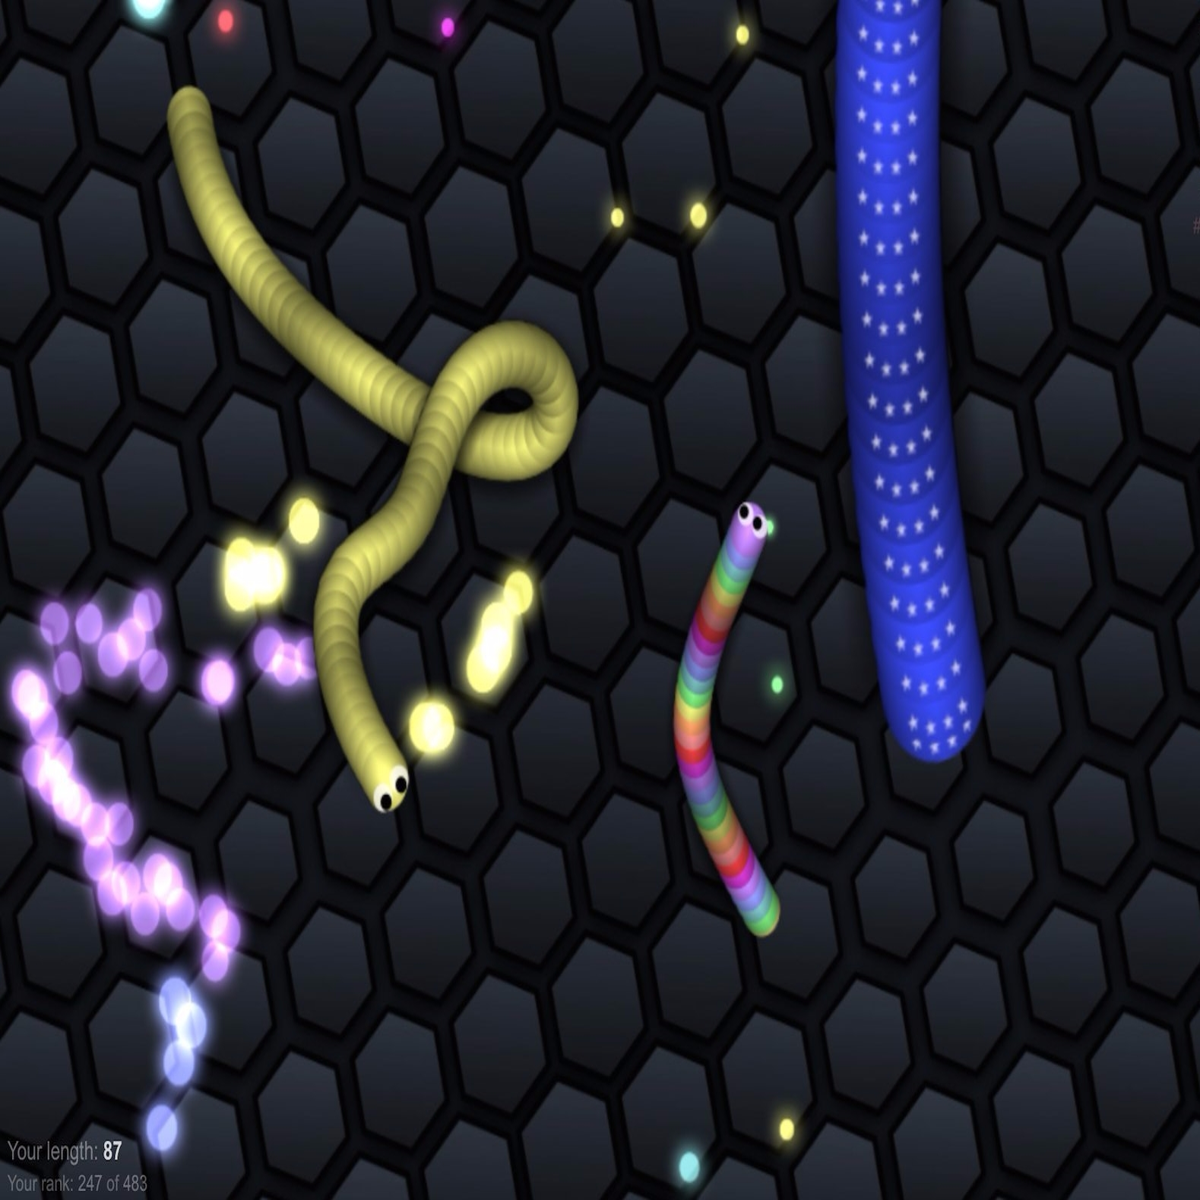 OBFOG - Meet the new snake game Splix io style. This is new Paper